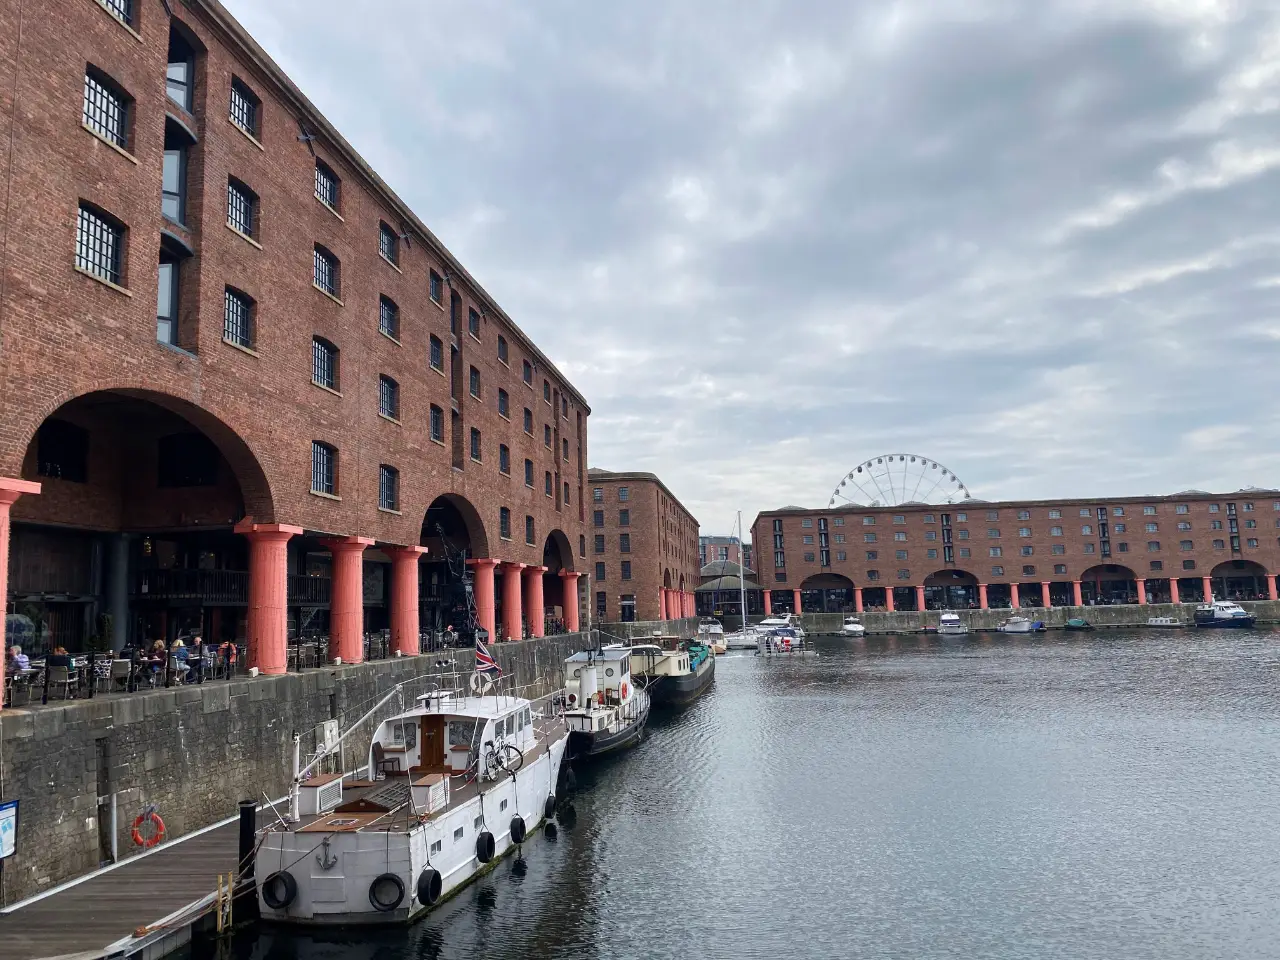 Albert Dock in Liverpool, one of the most famous landmarks of Liverpool